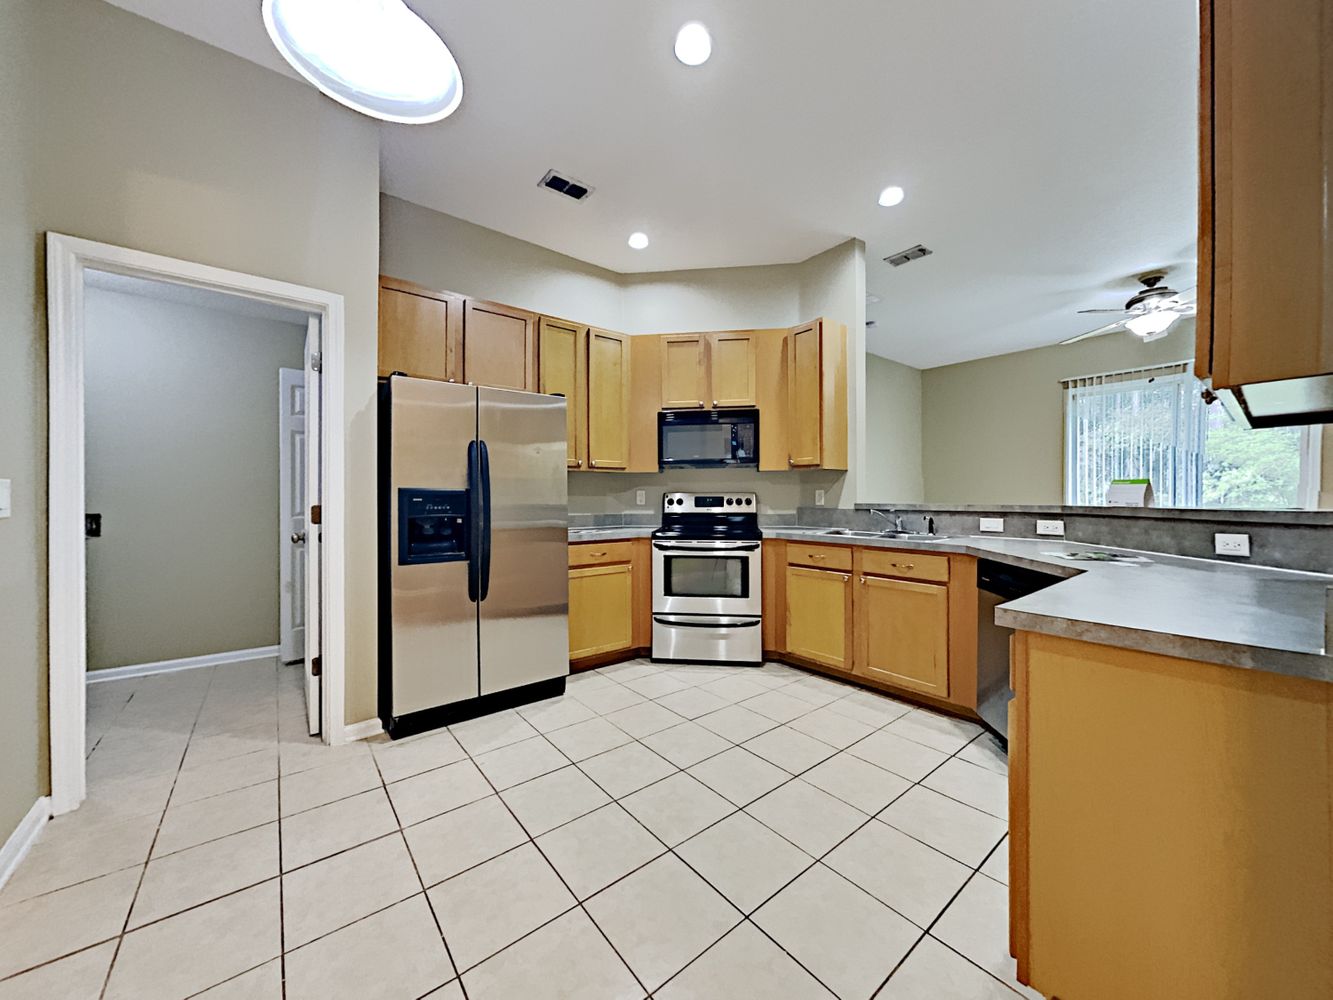 Spacious kitchen with stainless steel appliances at Invitation Homes Jacksonville.